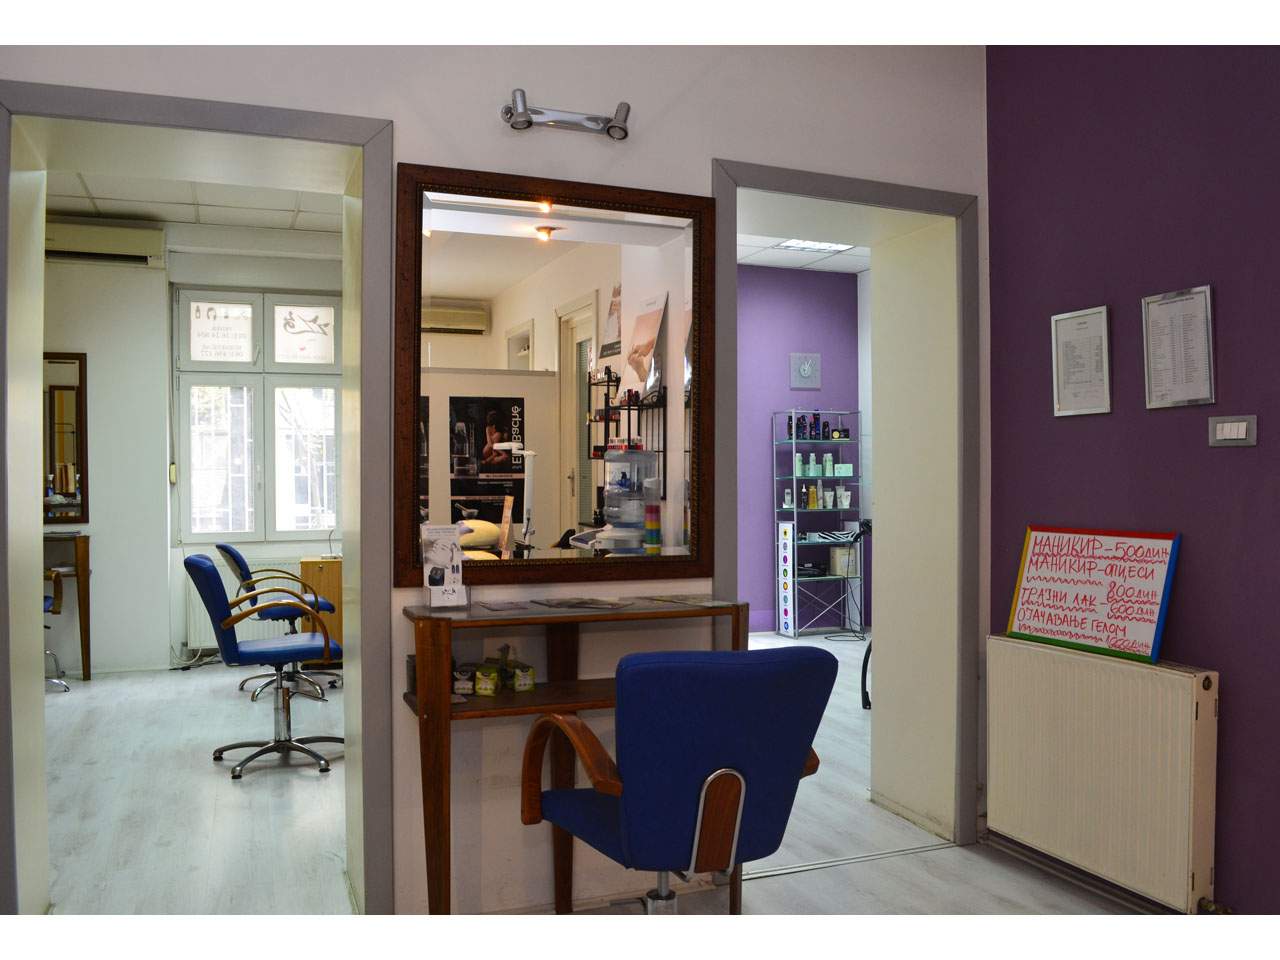 HAIRDRESSING AND COSMETIC SALON ZZ2 Hairdressers Belgrade - Photo 4